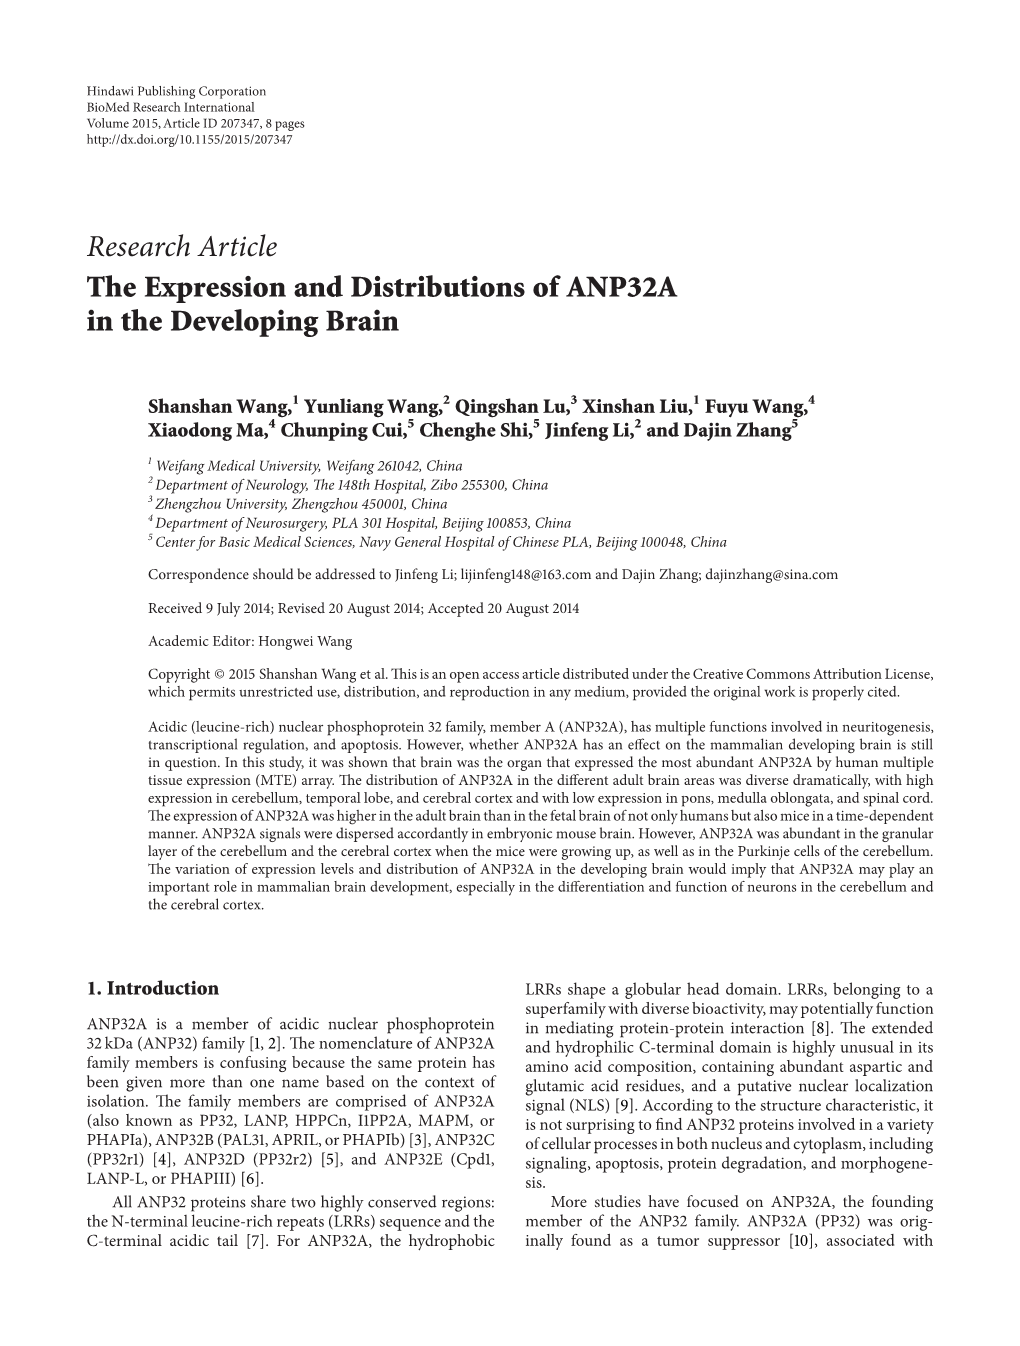 The Expression and Distributions of ANP32A in the Developing Brain